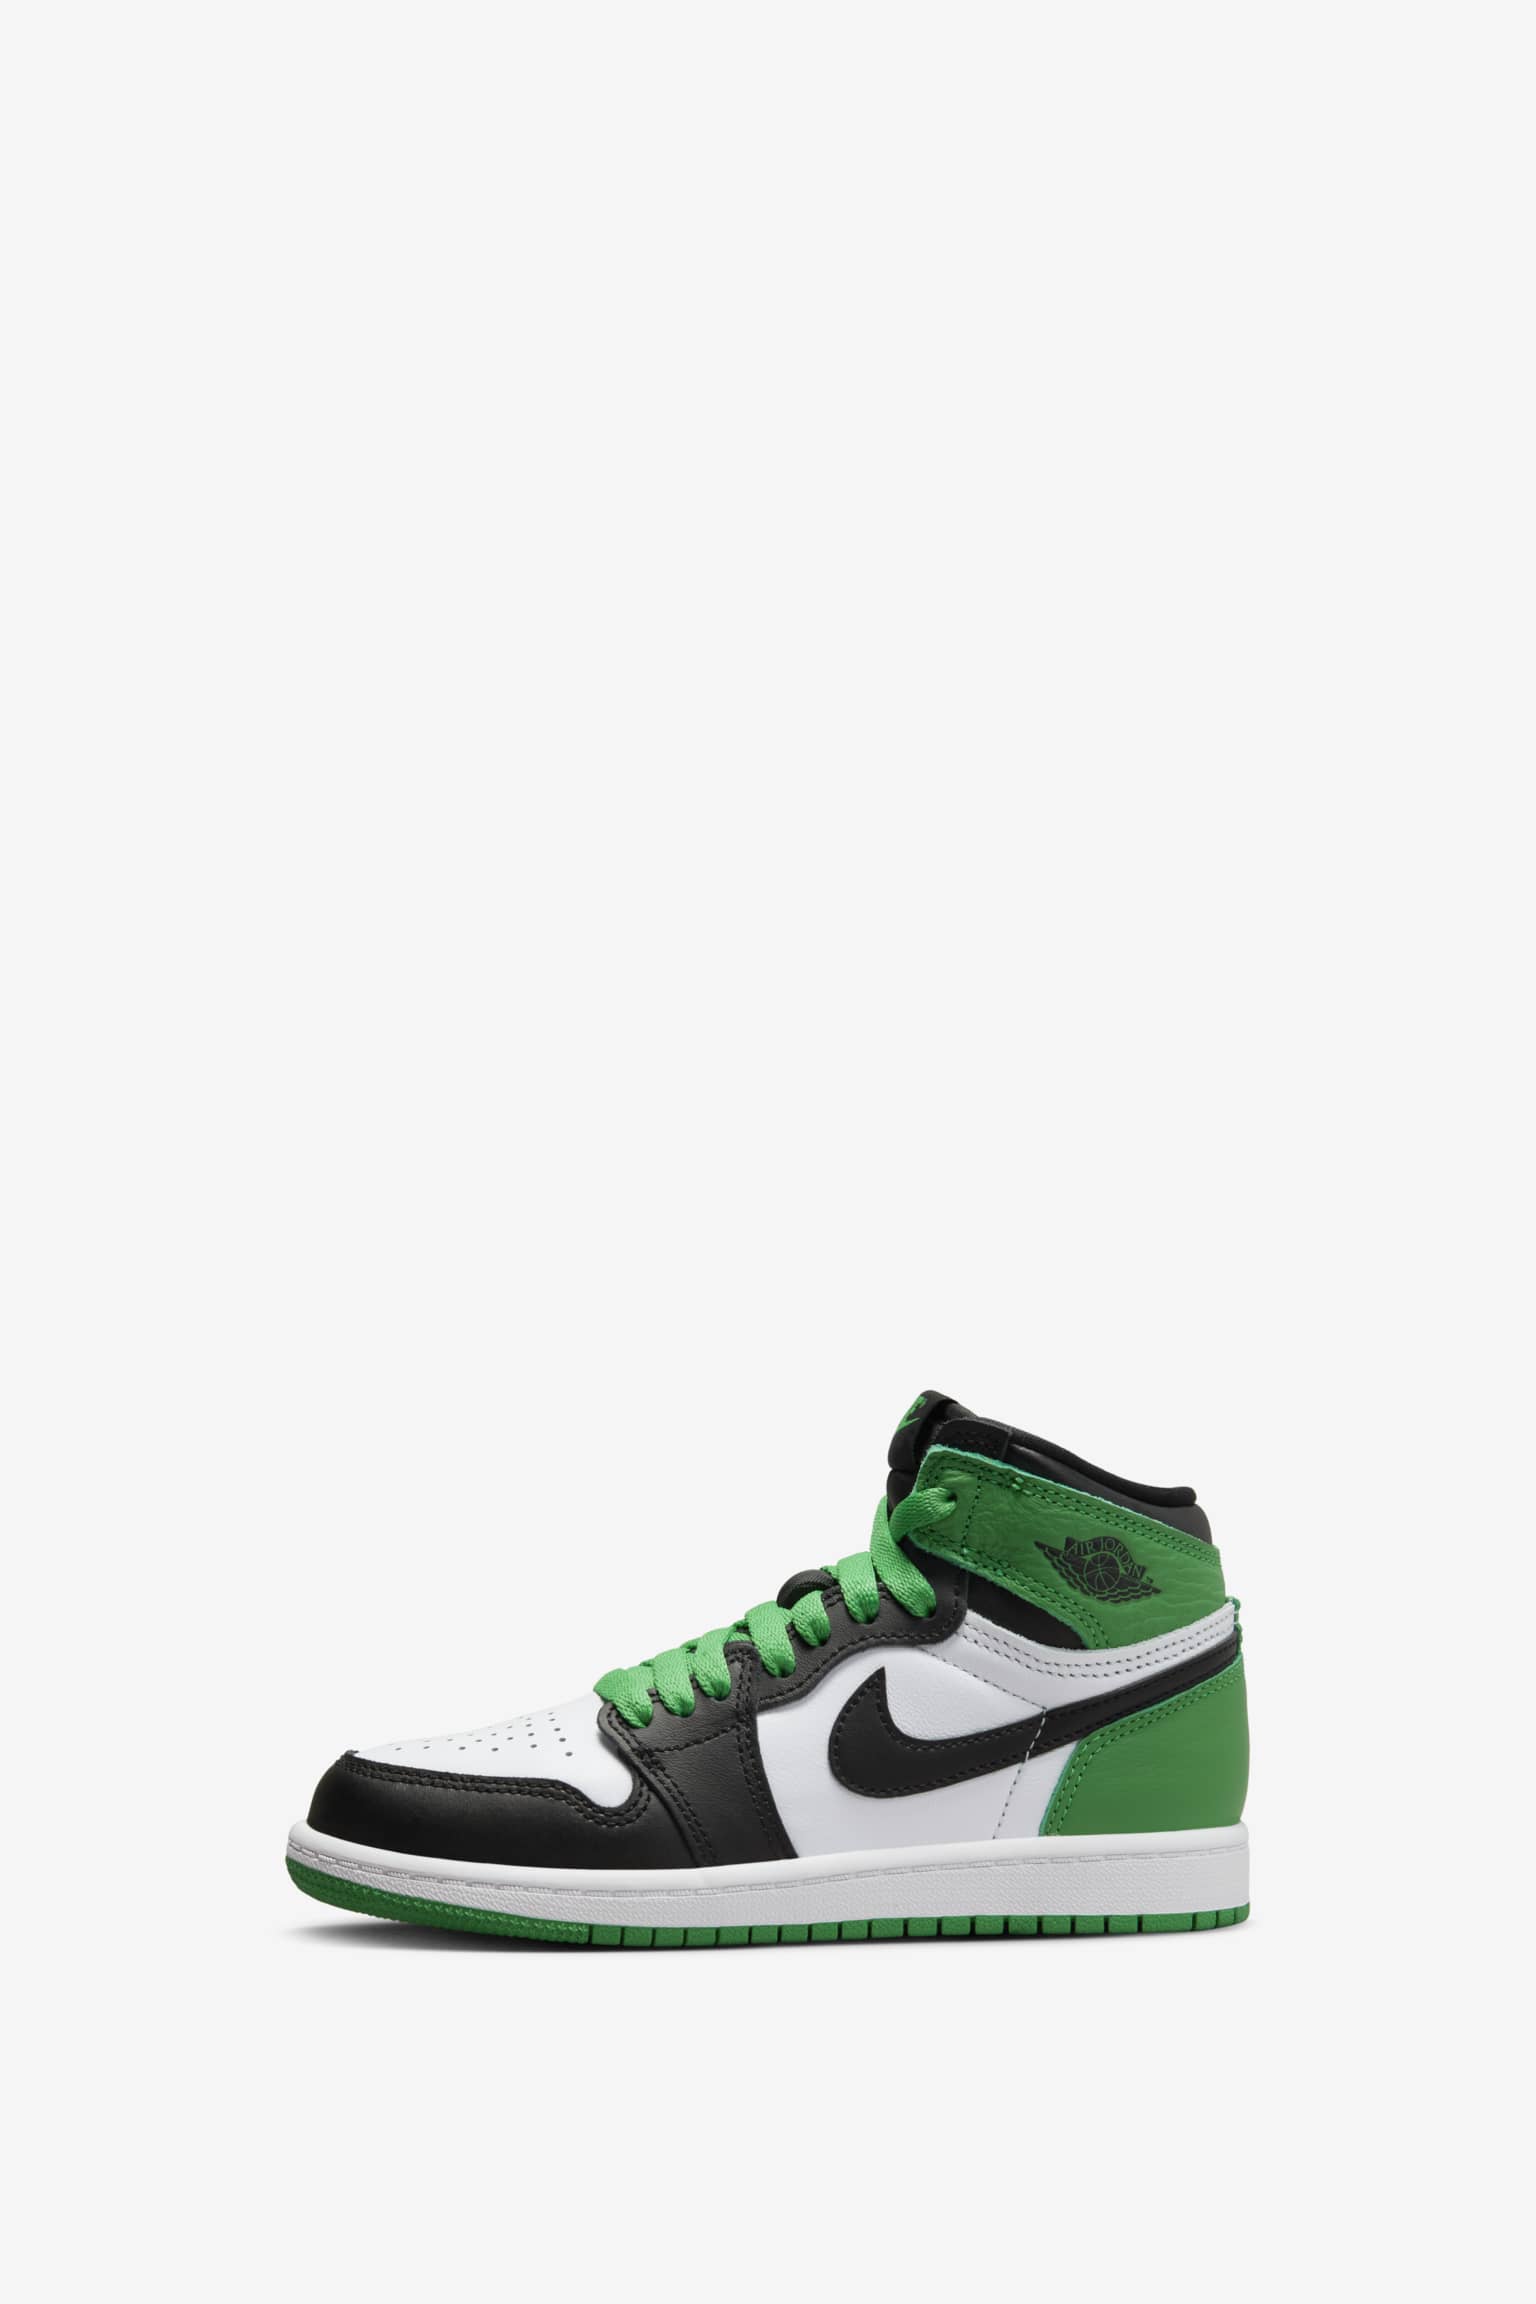 NIKE公式】エア ジョーダン 1 HIGH 'Black and Lucky Green' (DZ5485